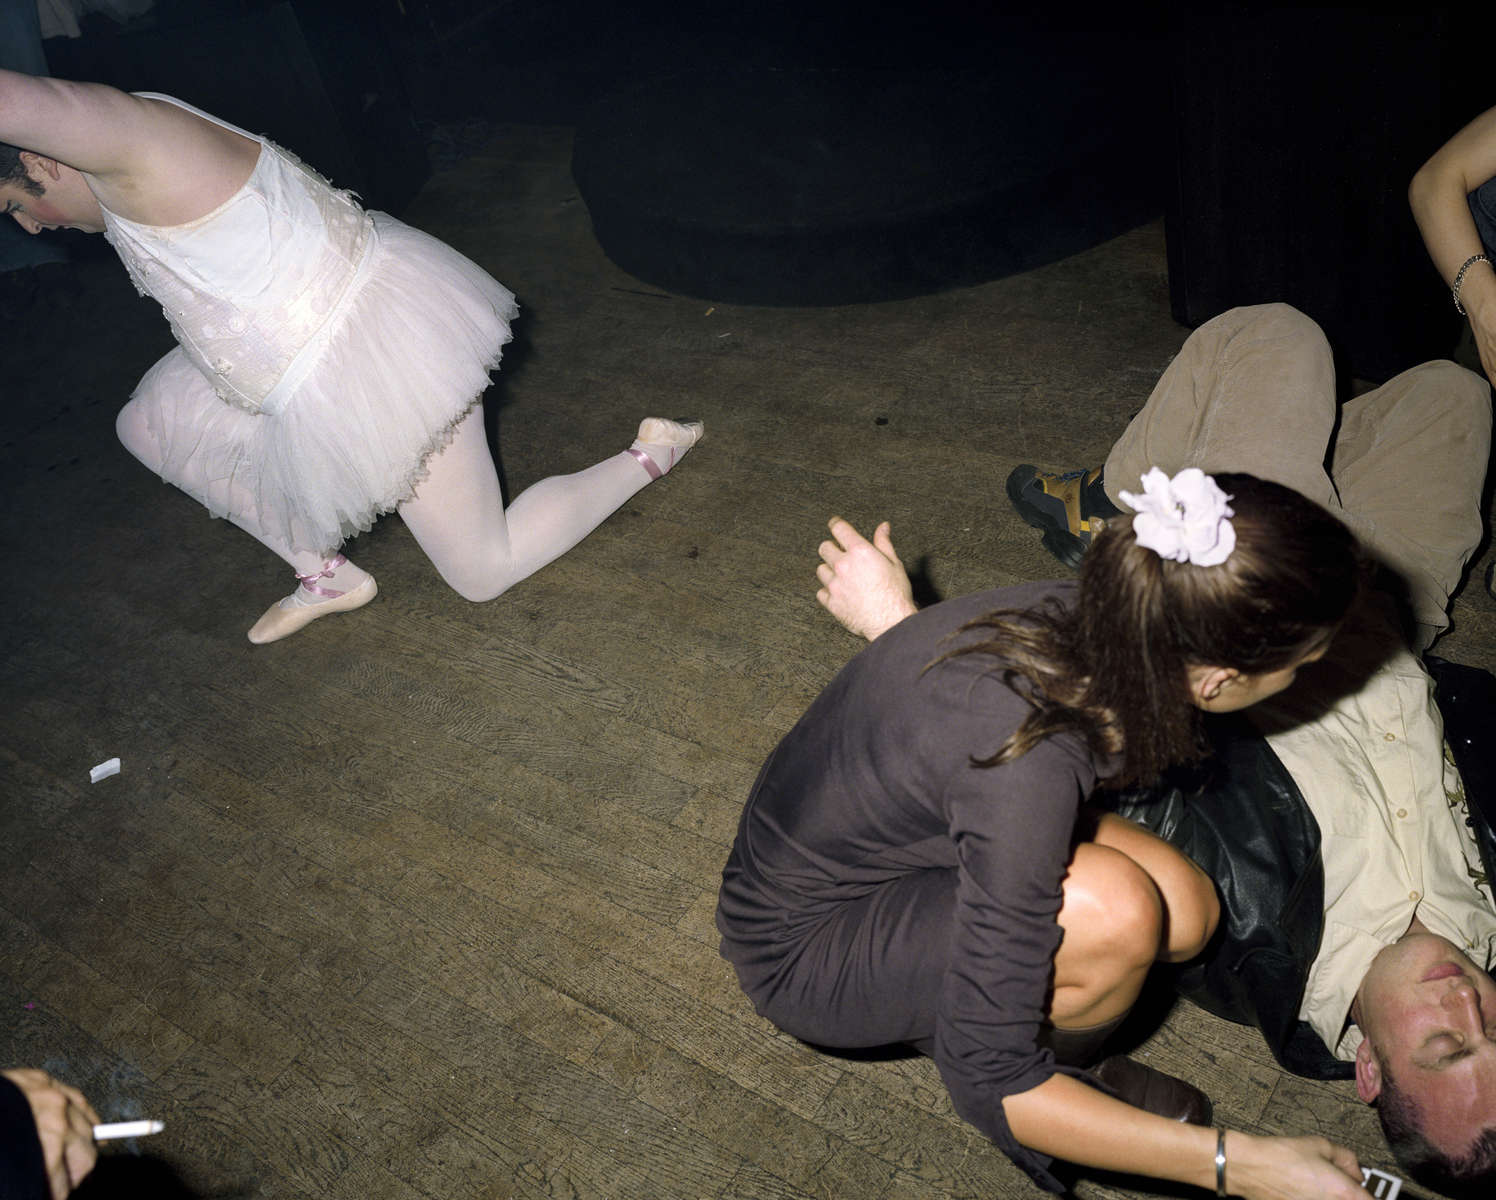 A male entertainer dressed as a ballerina performs in a central London nightclub next to a man lying on the floor. May 2000